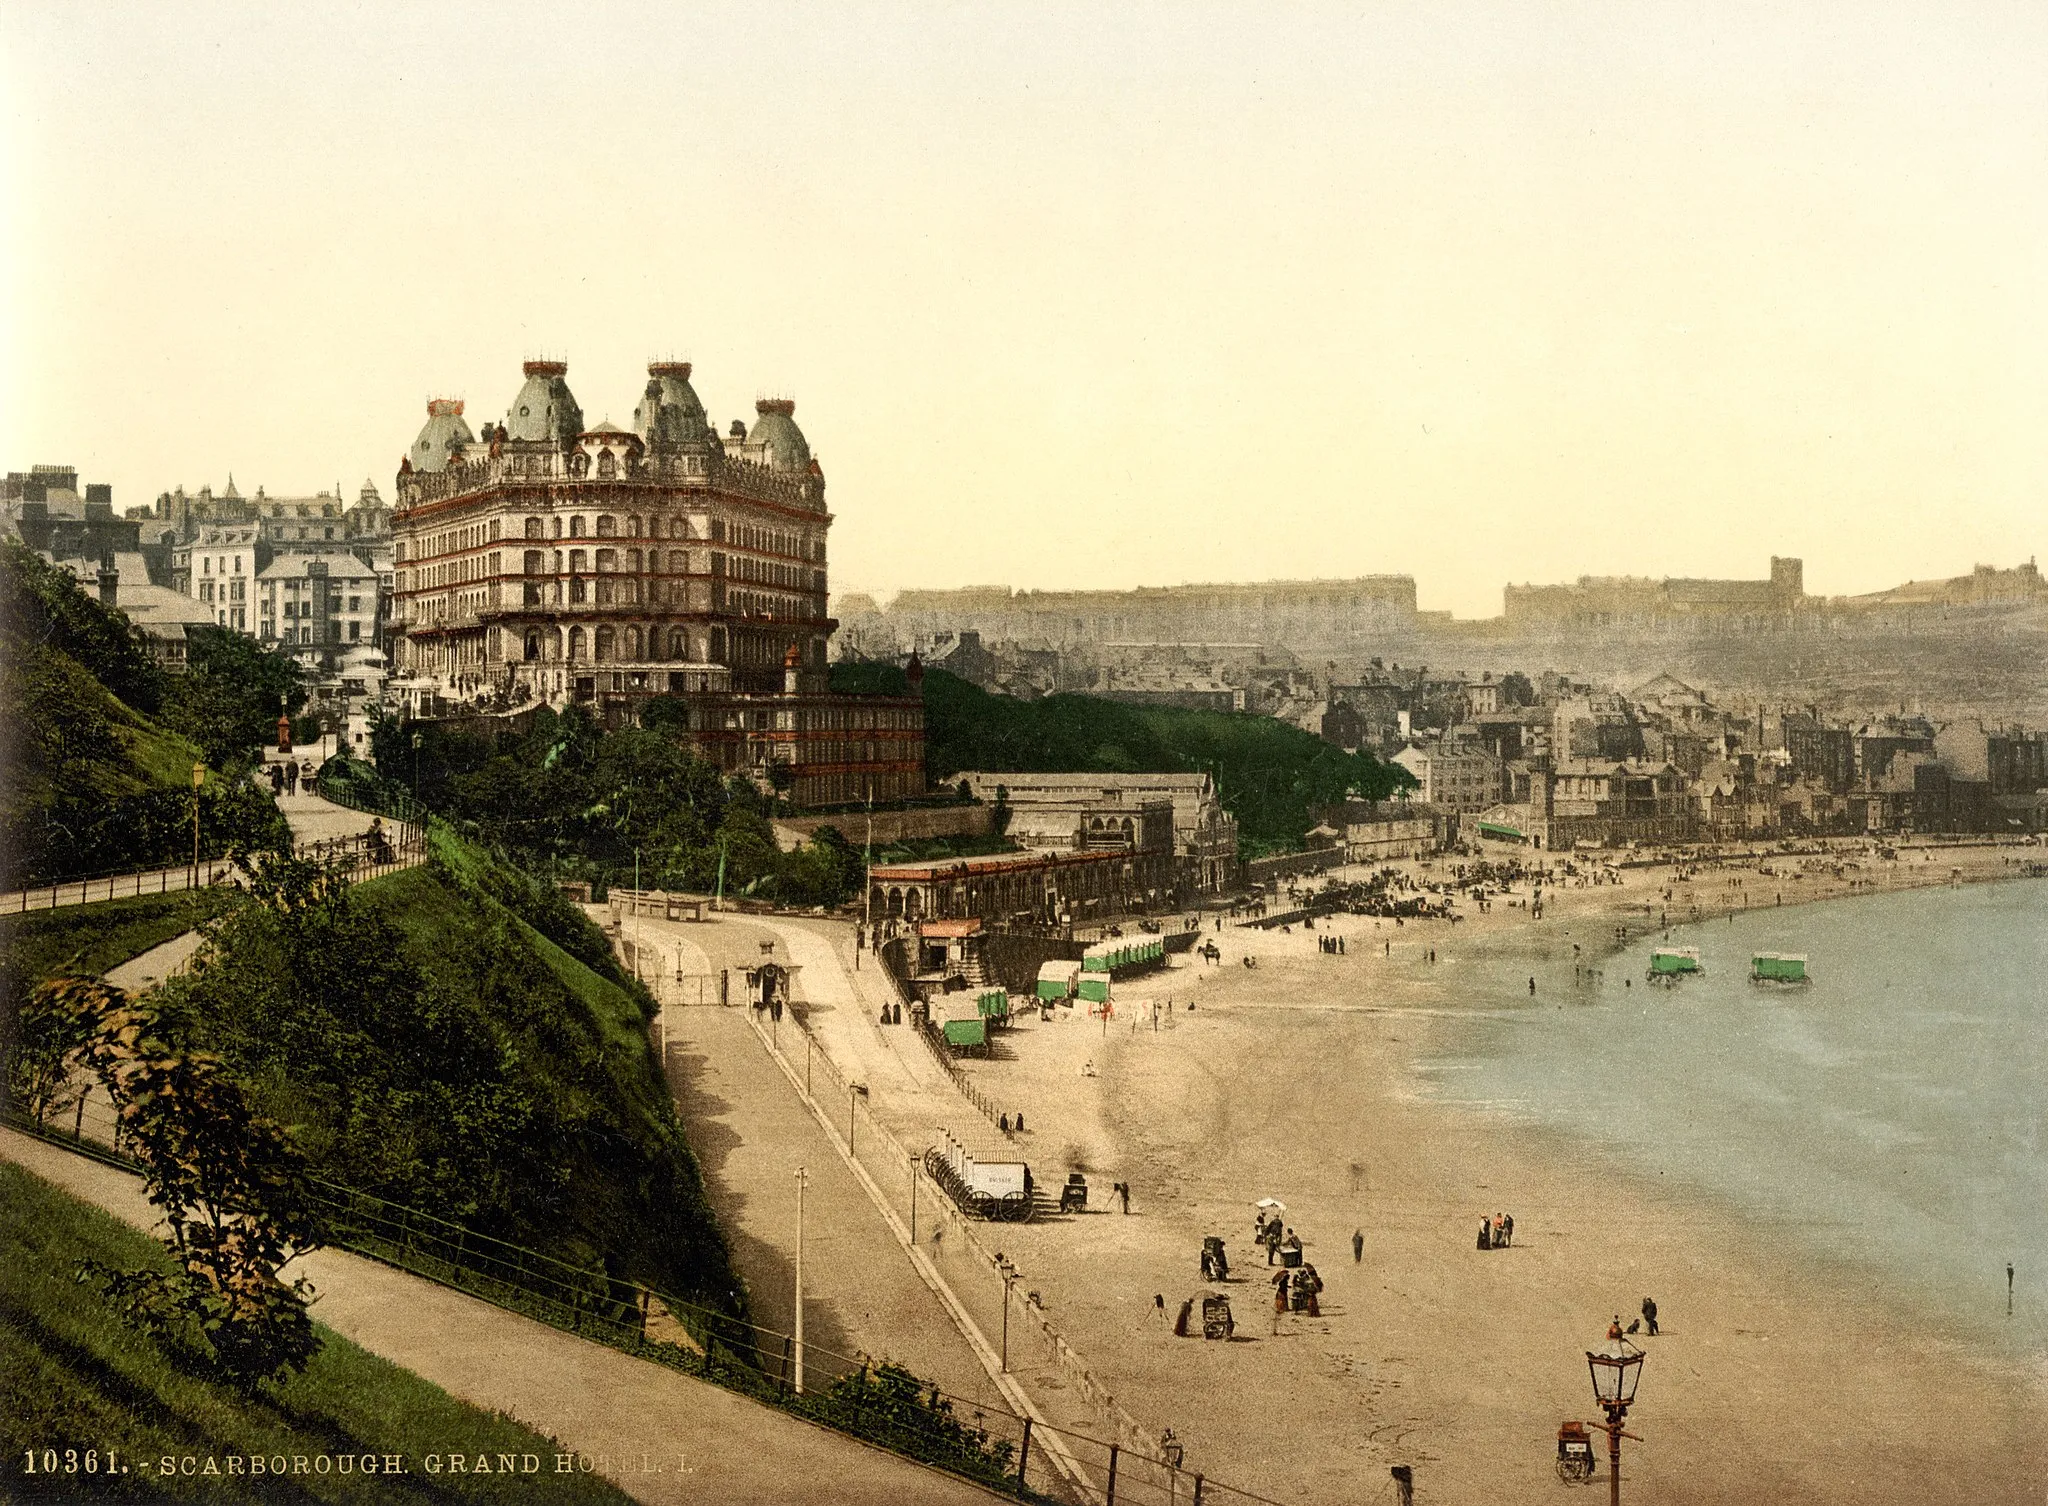 Photo showing: Grand Hotel, Scarborough, Yorkshire, England. 1 photomechanical print : photochrom, color.